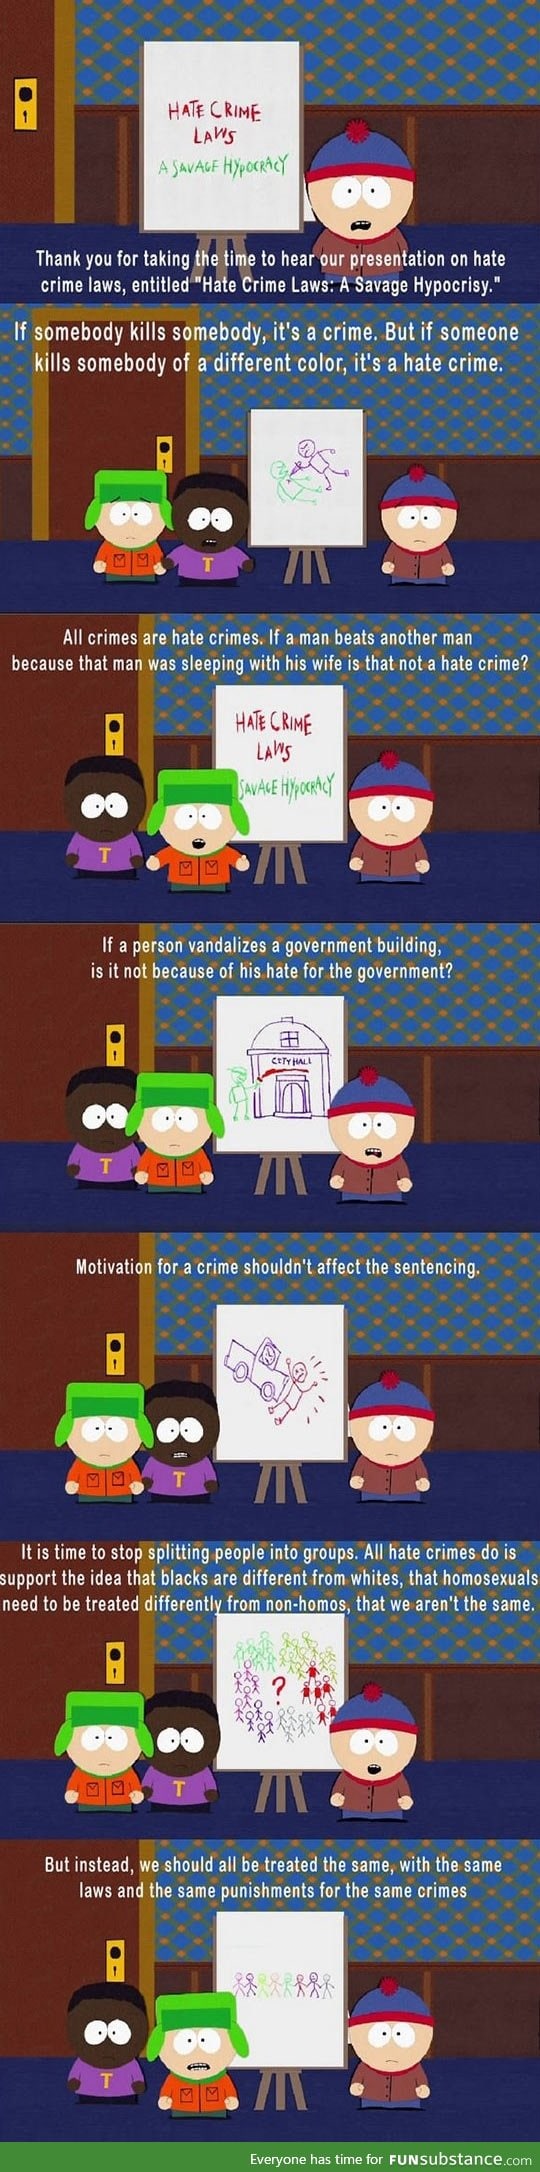 South Park Gets It Right